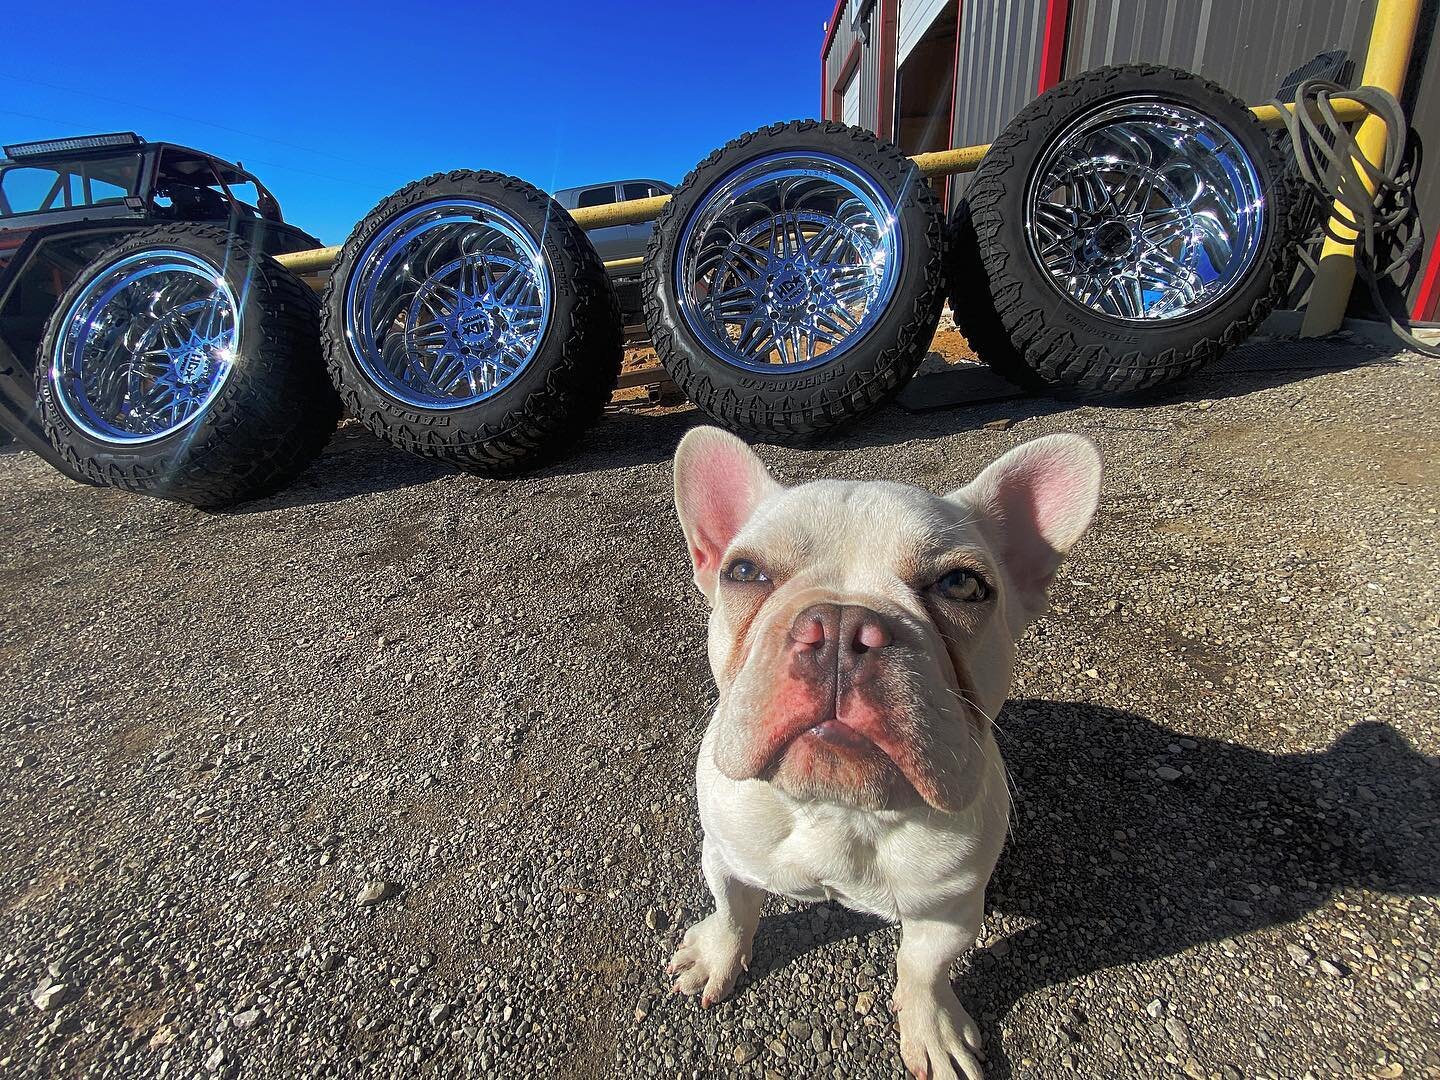 Shop foreman inspecting the product before install !
#frenchiefriday
__________________________
☎️ 682-666-8374
🌎 www.neversatisfiedKustoms.com
.

#builtbyNsk
#wheels #wheelgram  #wheelshop 
#liftedtrucks #lifted #trucks #customized #rims #customwhe